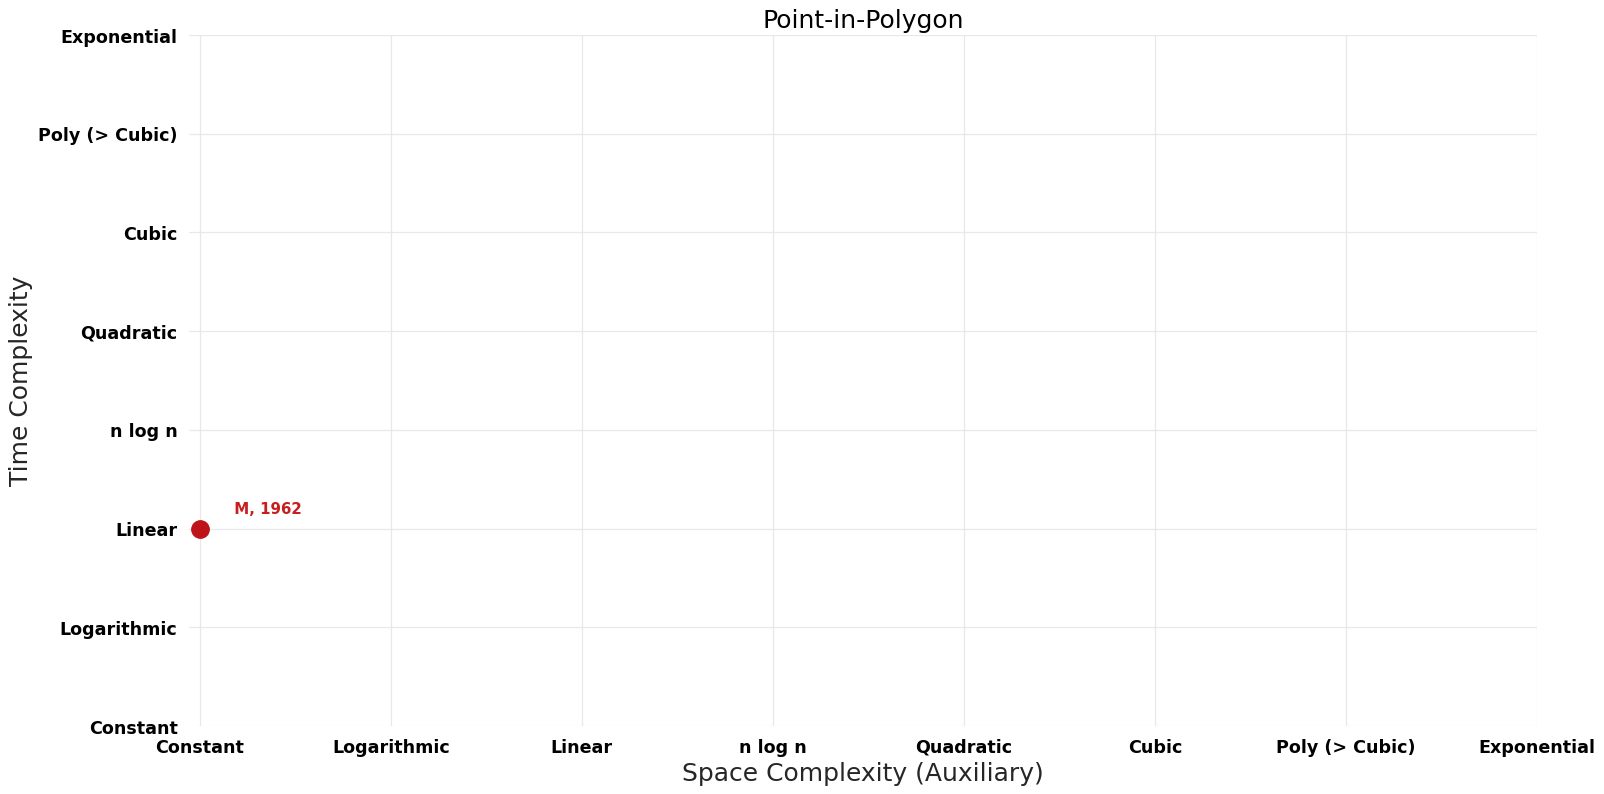 Point-in-Polygon - Pareto Frontier.png